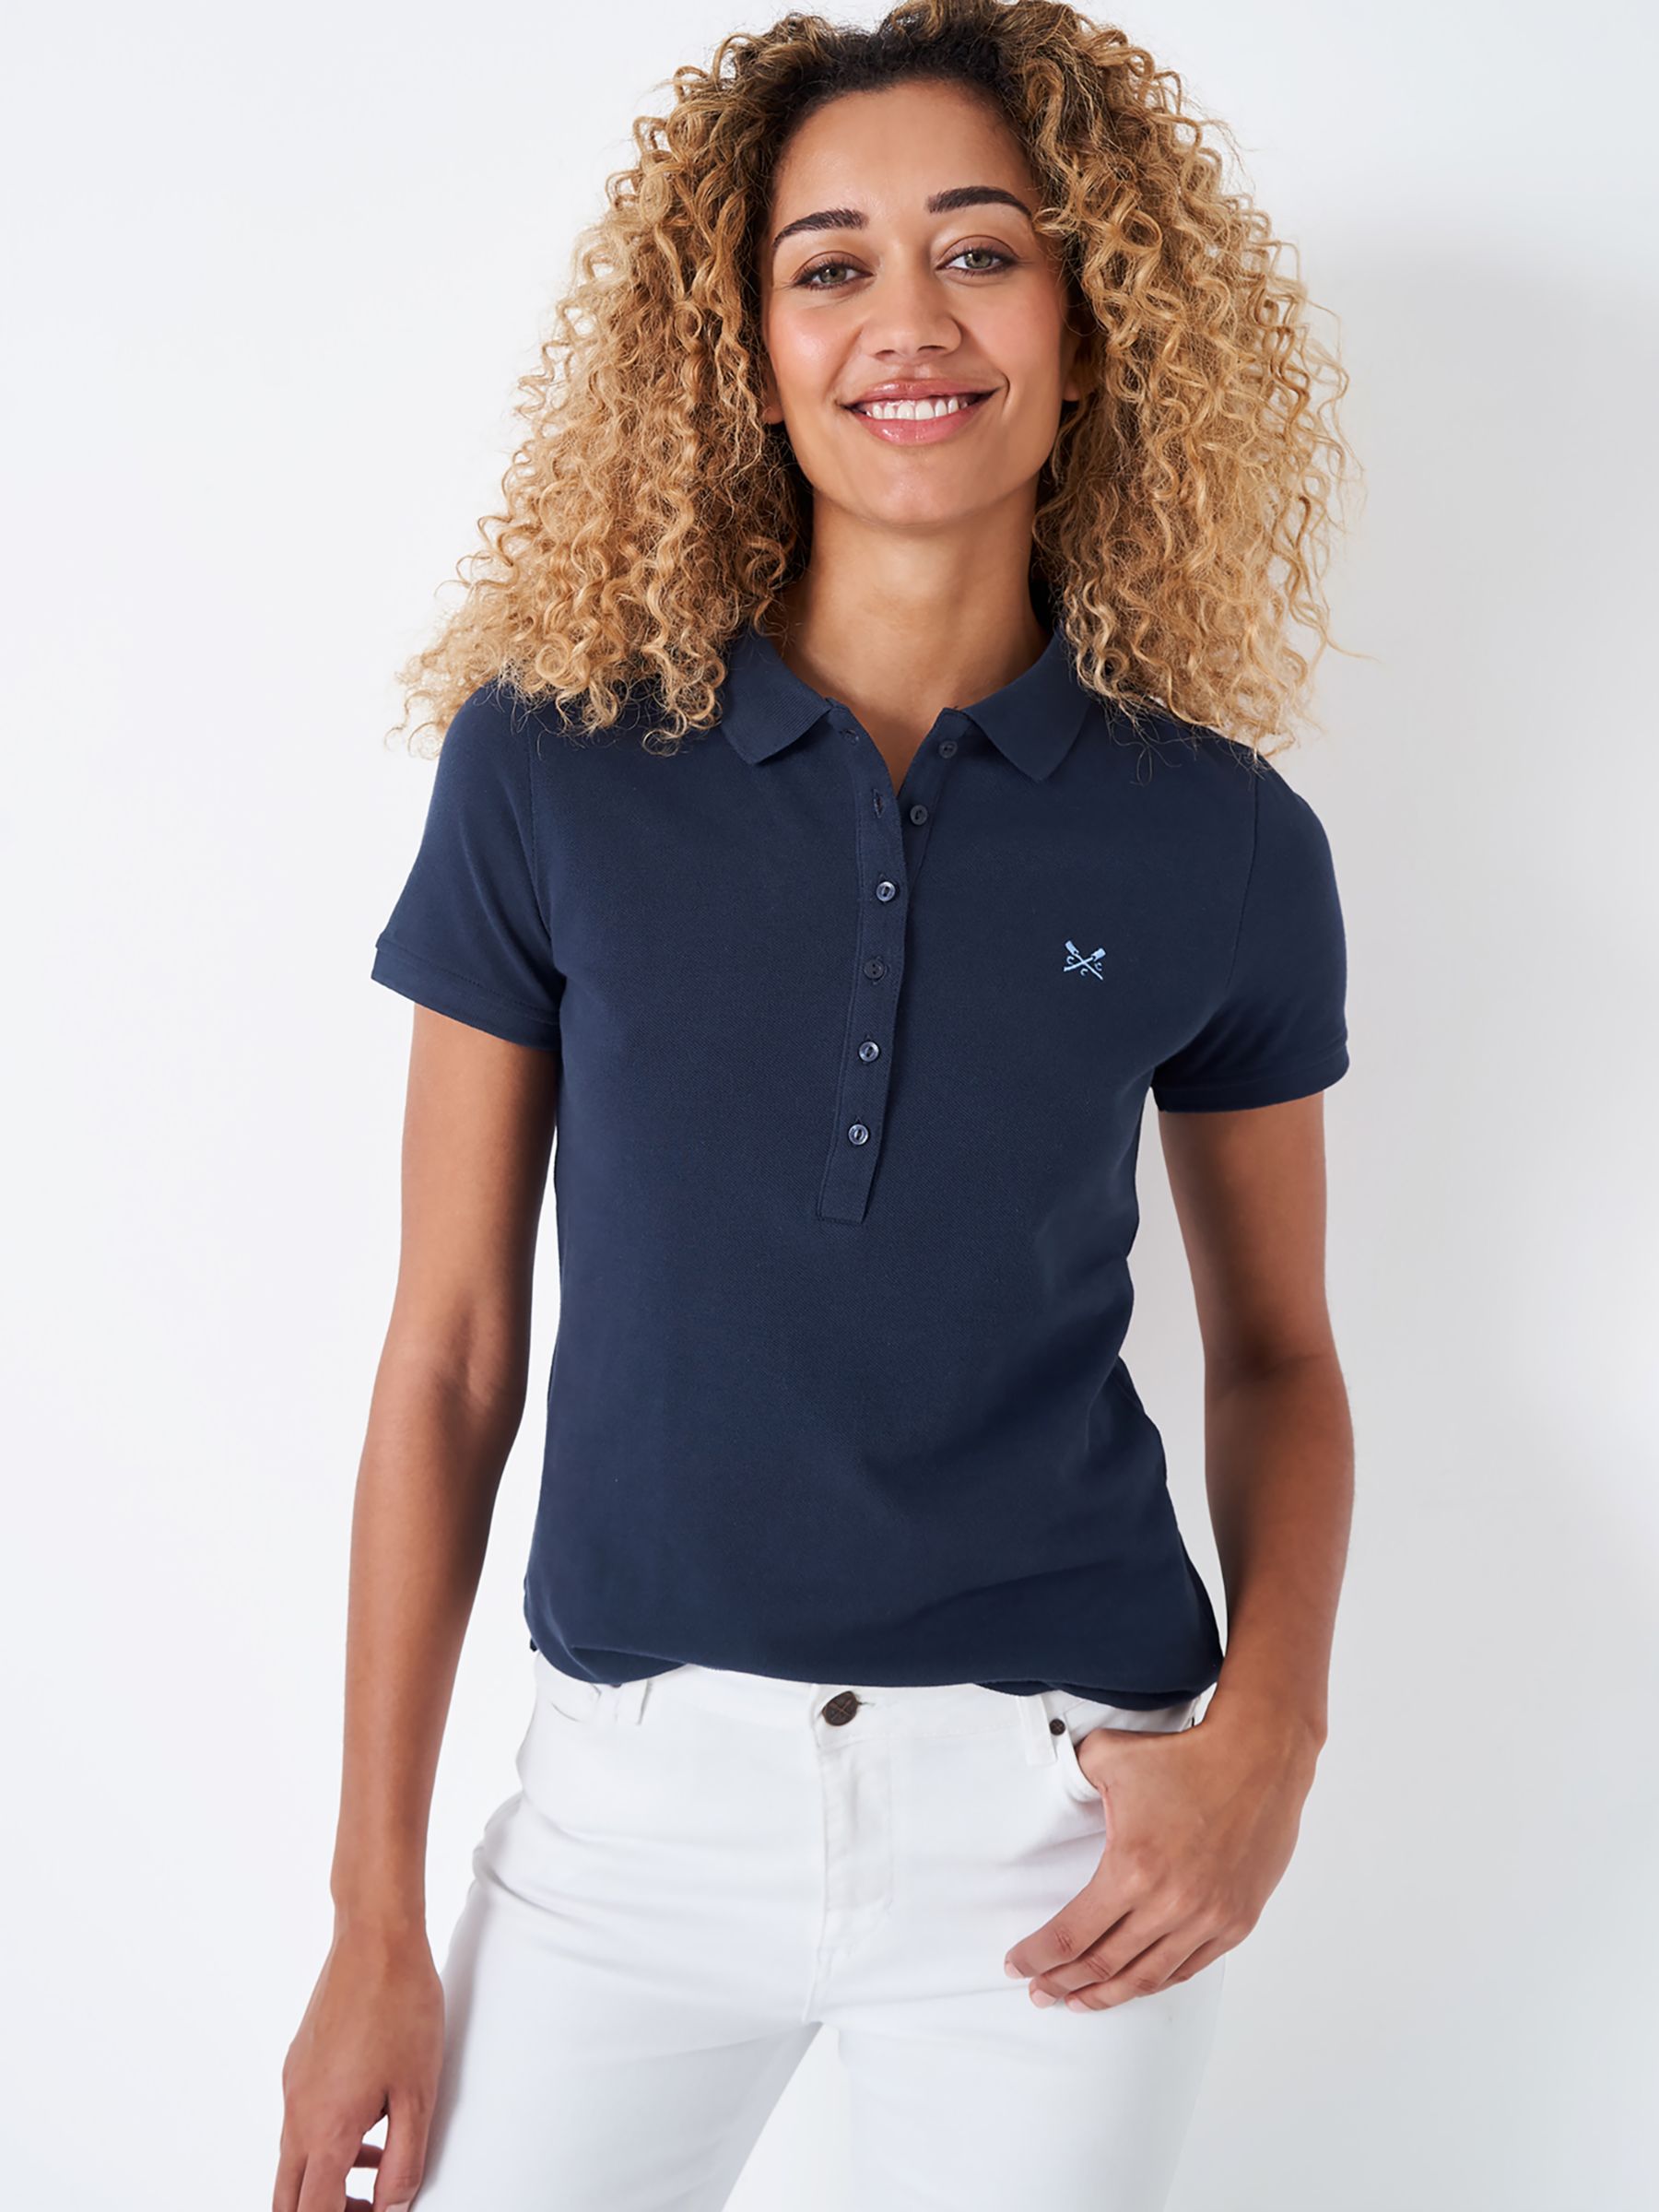 Womens Collared Work Shirt V Neck Business Casual Tops Short Sleeve Polo  Shirts Navy Blue L